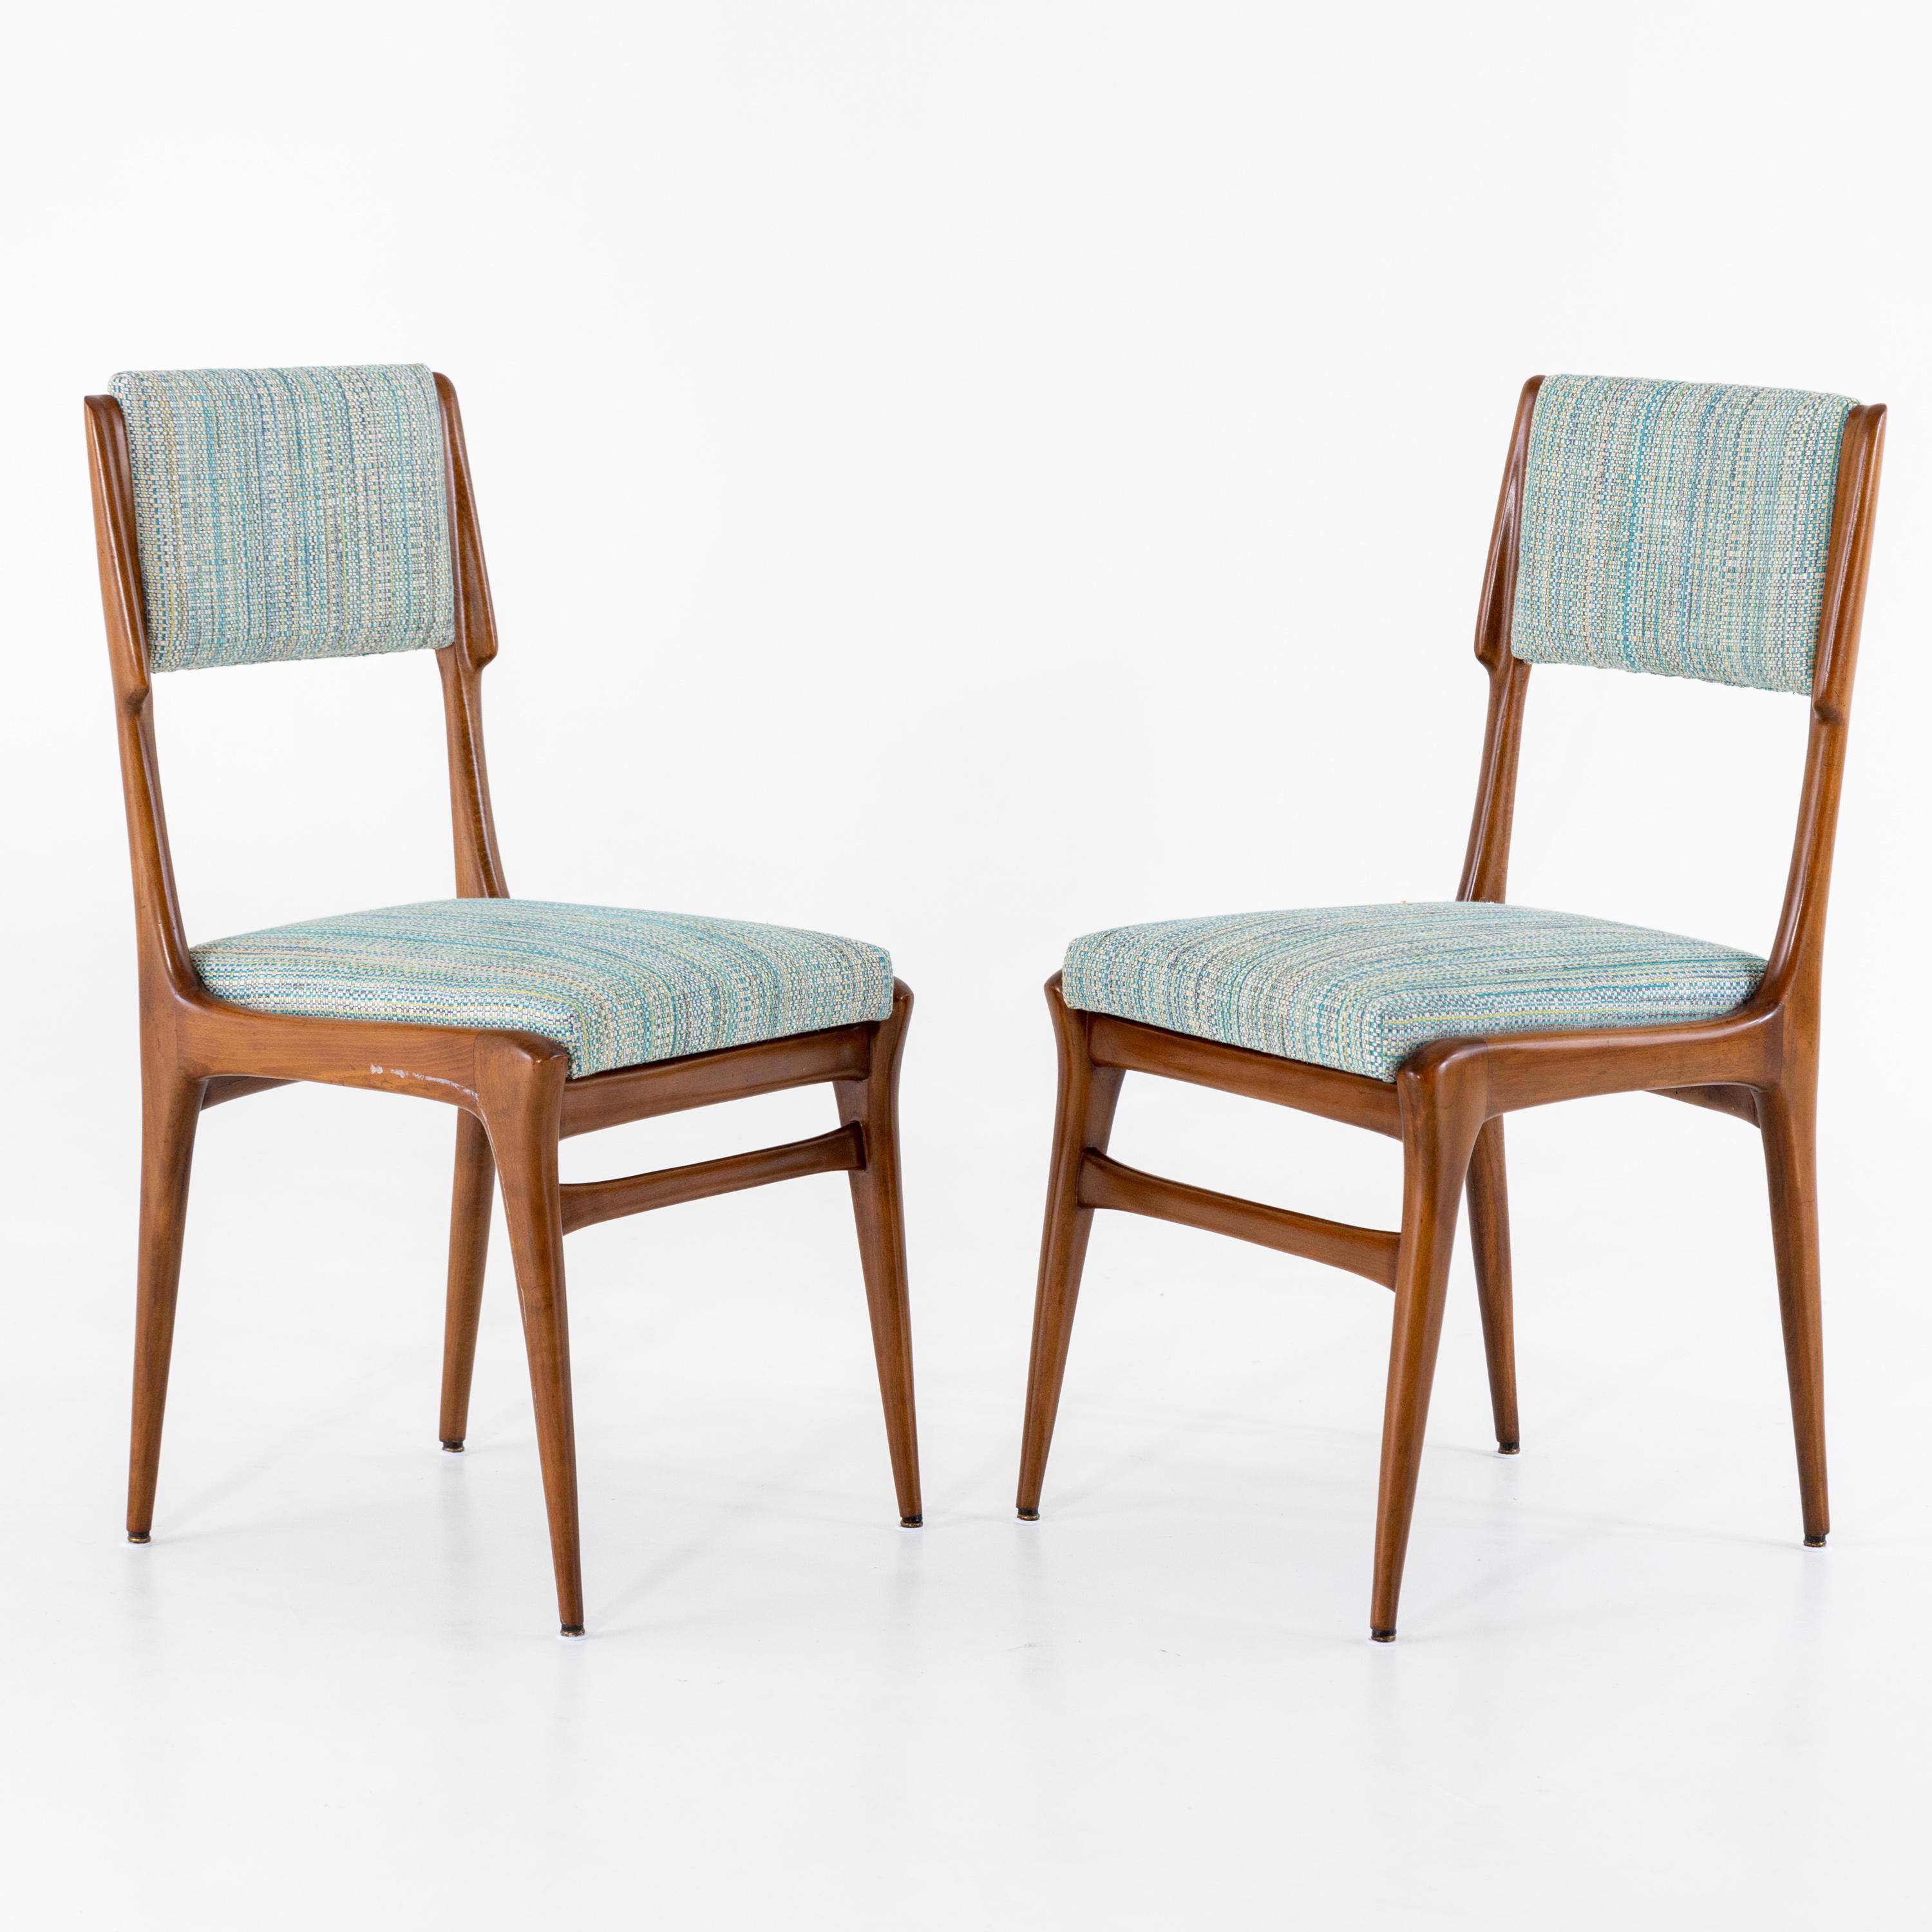 Dining Room Chairs, Italy Mid-20th Century 3